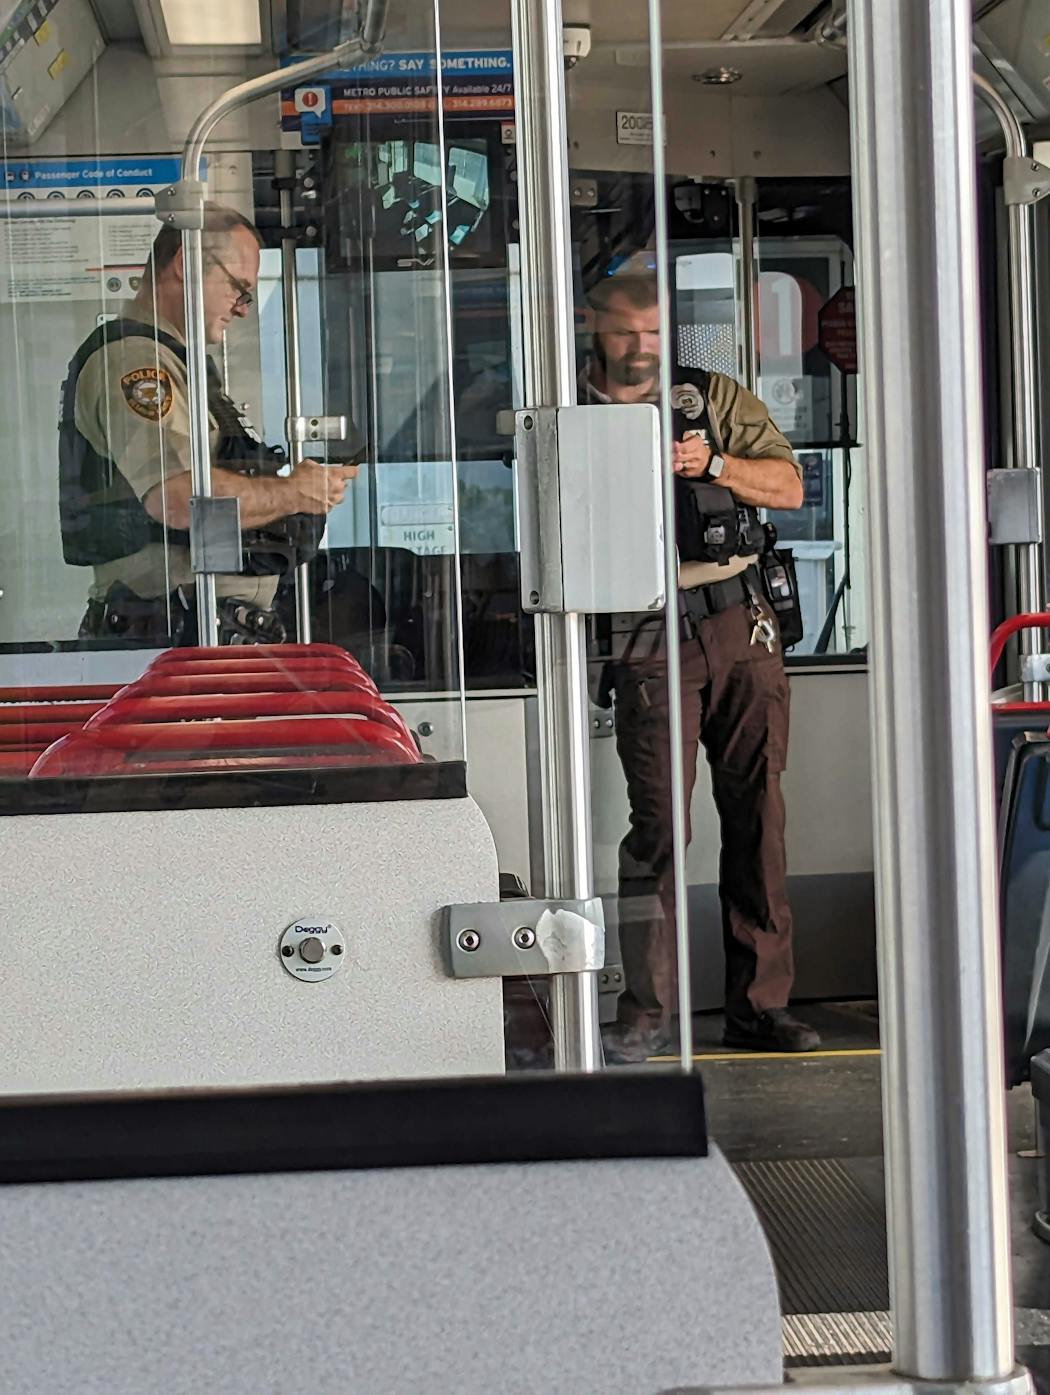 Stepped-up police patrols are part of the intensive security reboot of the St. Louis light-rail system.